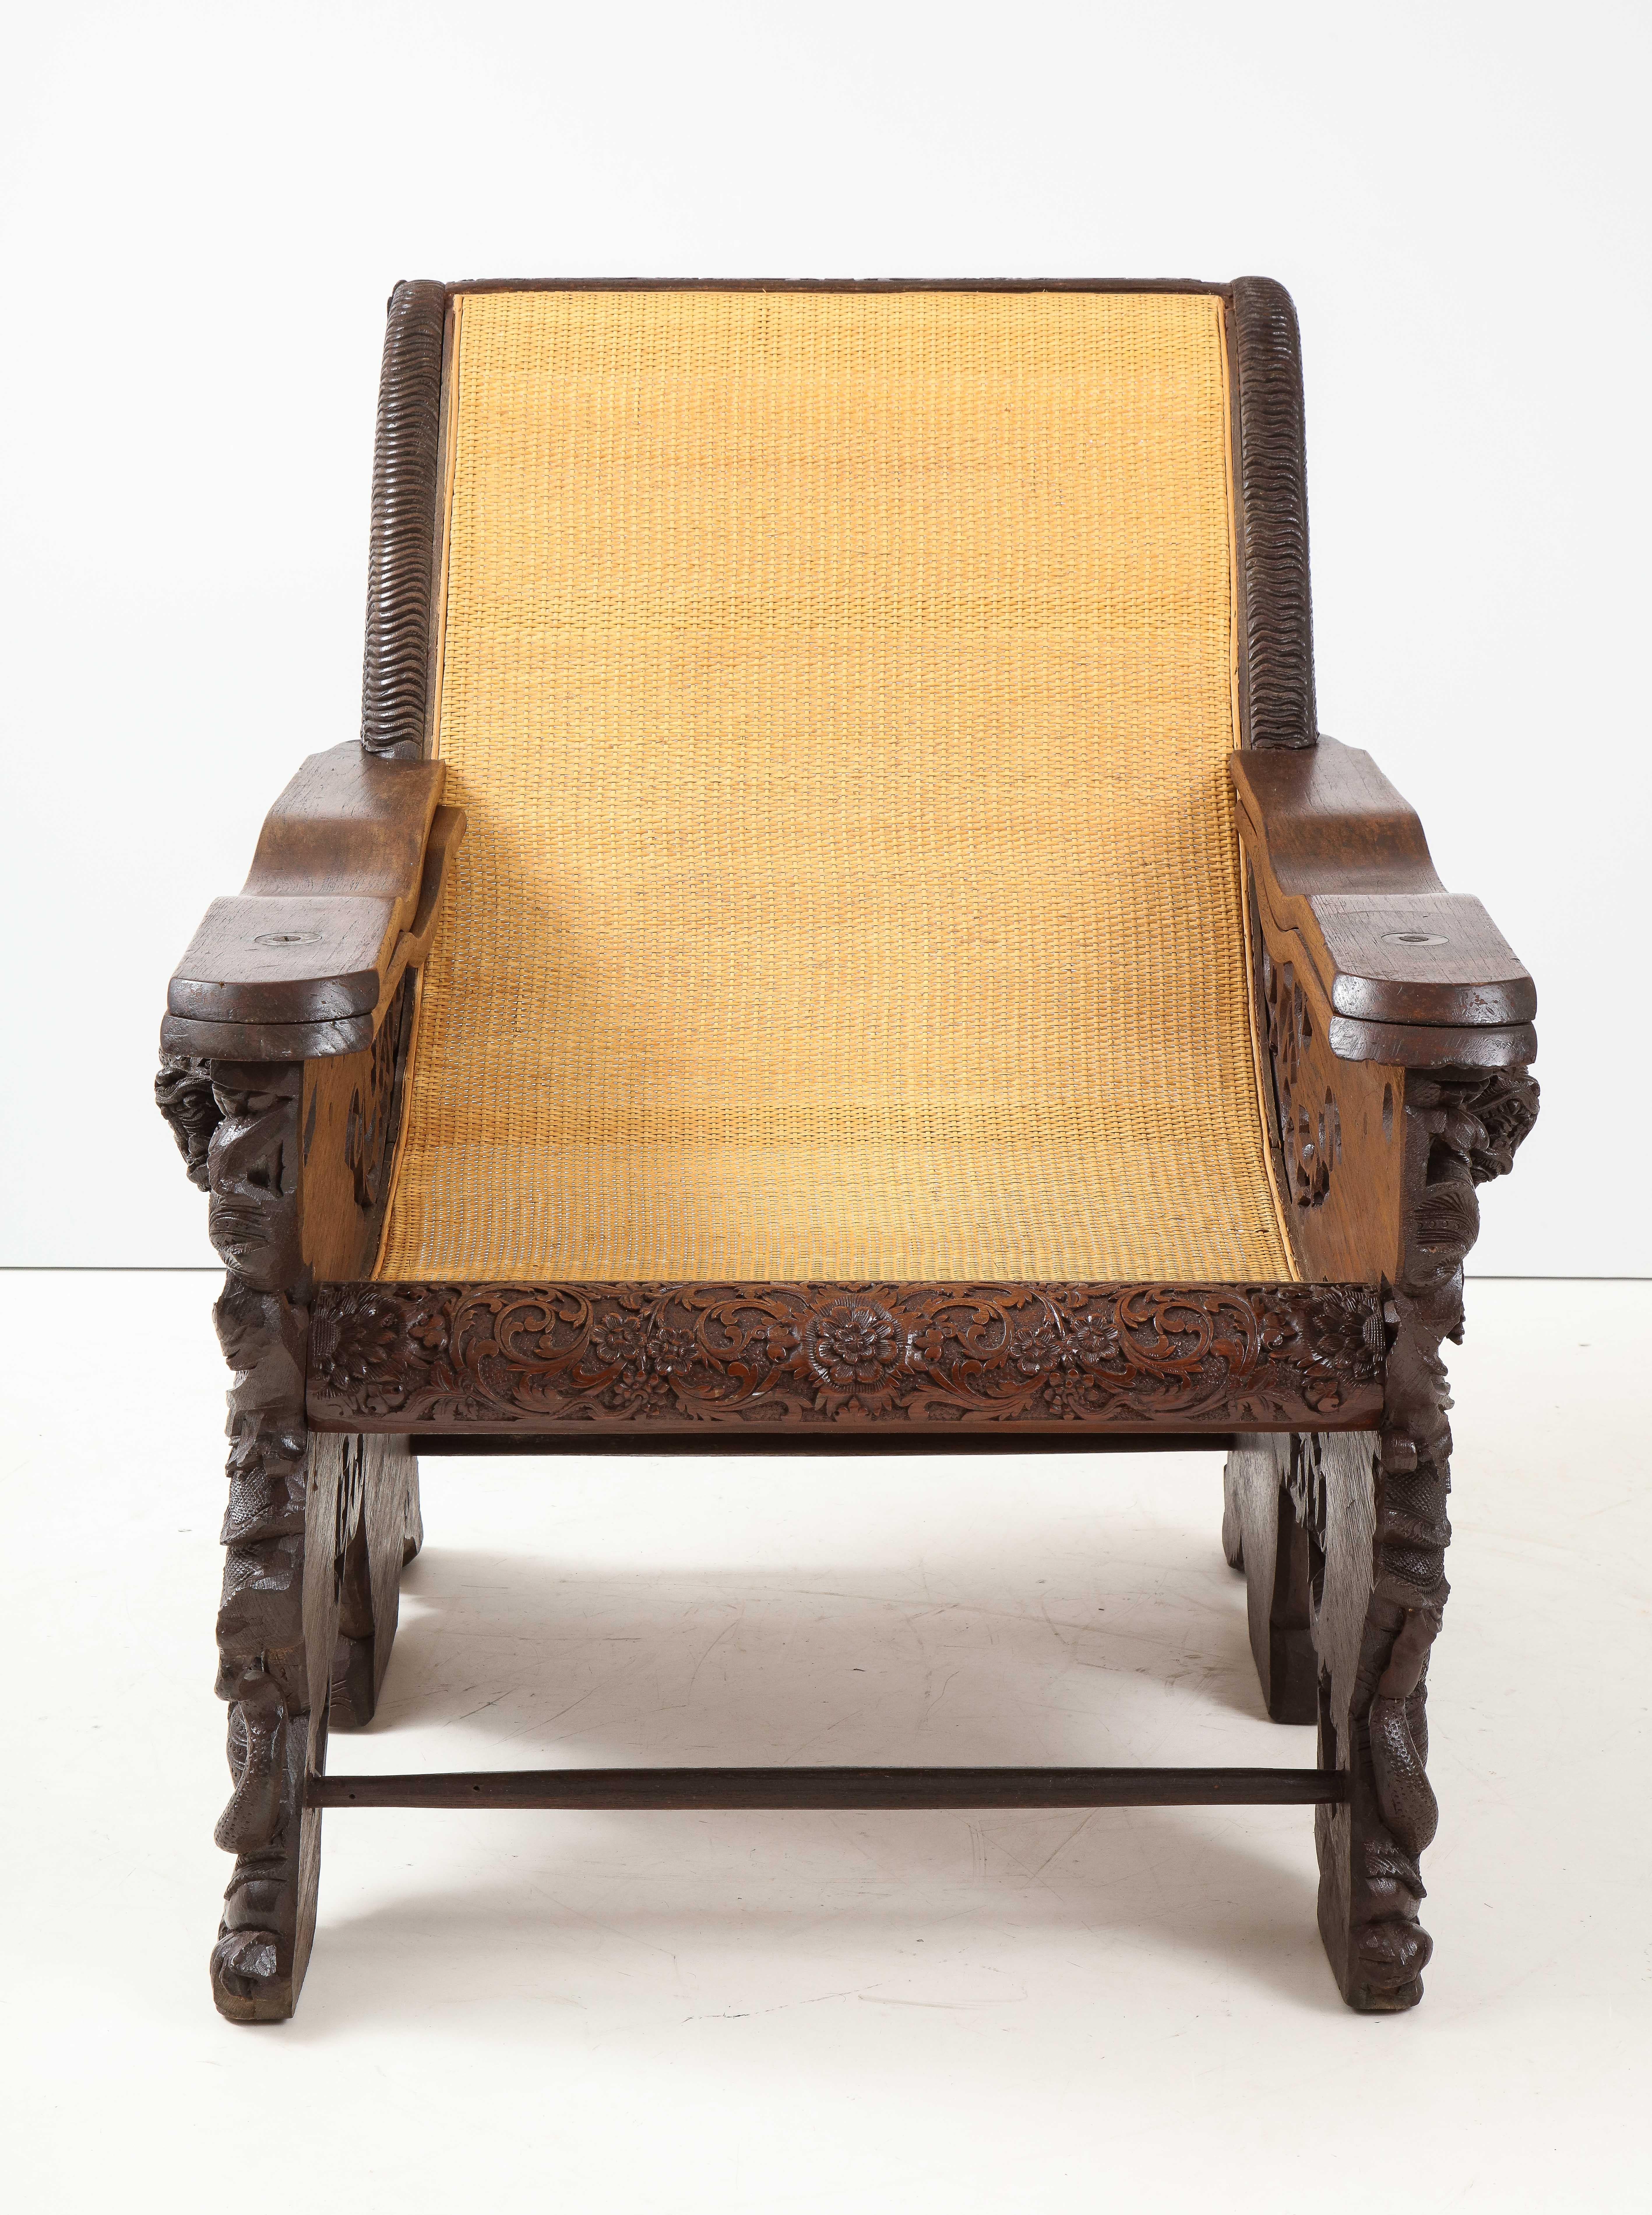 Balinese Heavily Carved Rosewood Plantation Chair